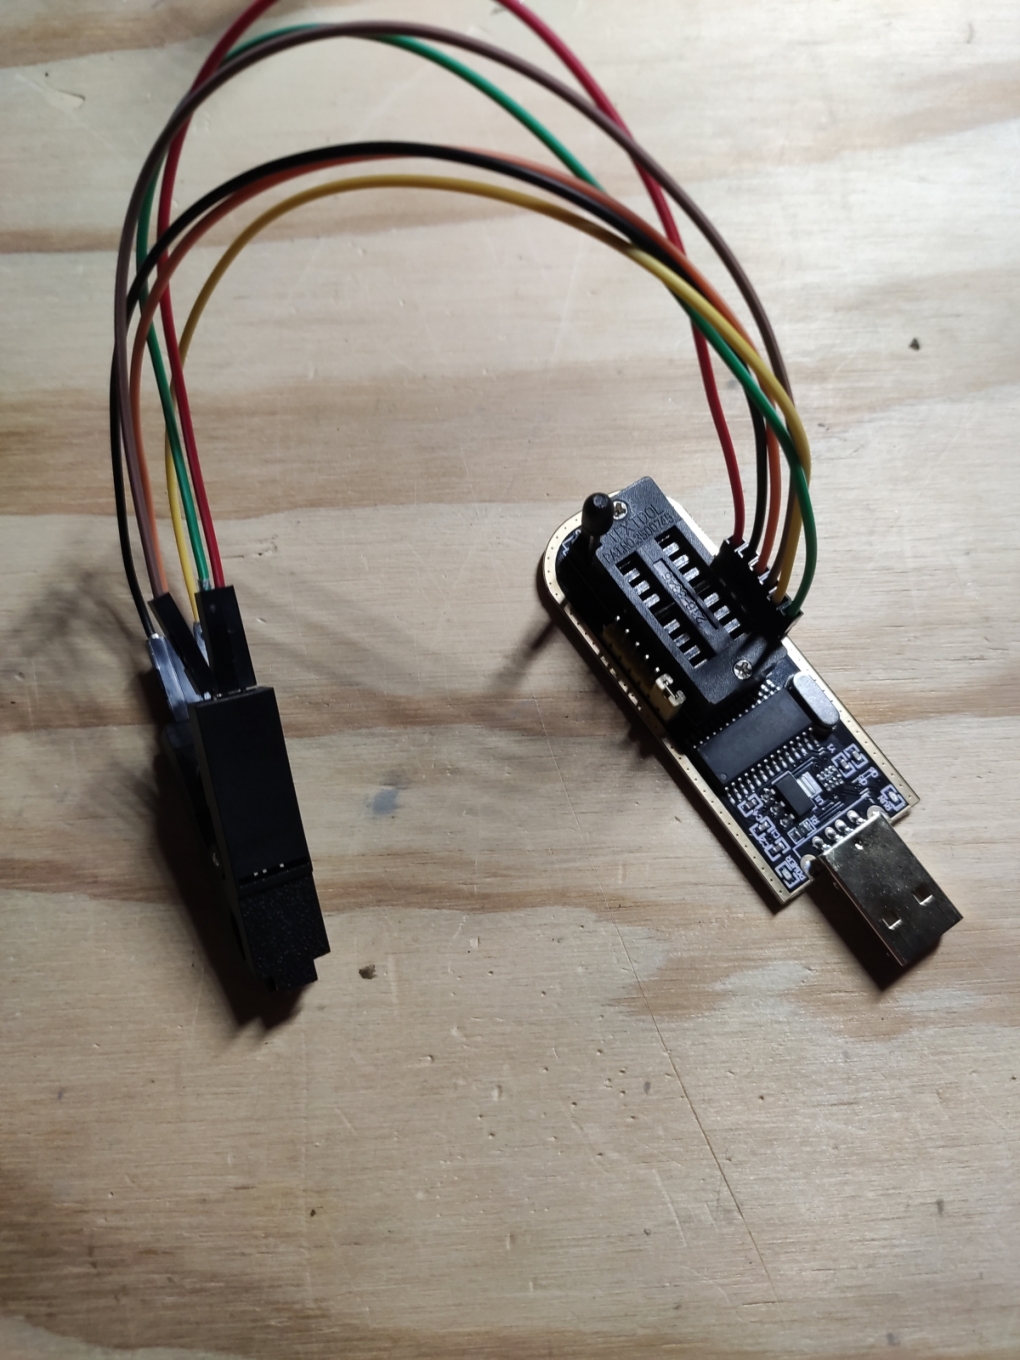 CH341A and SOIC 8 clip